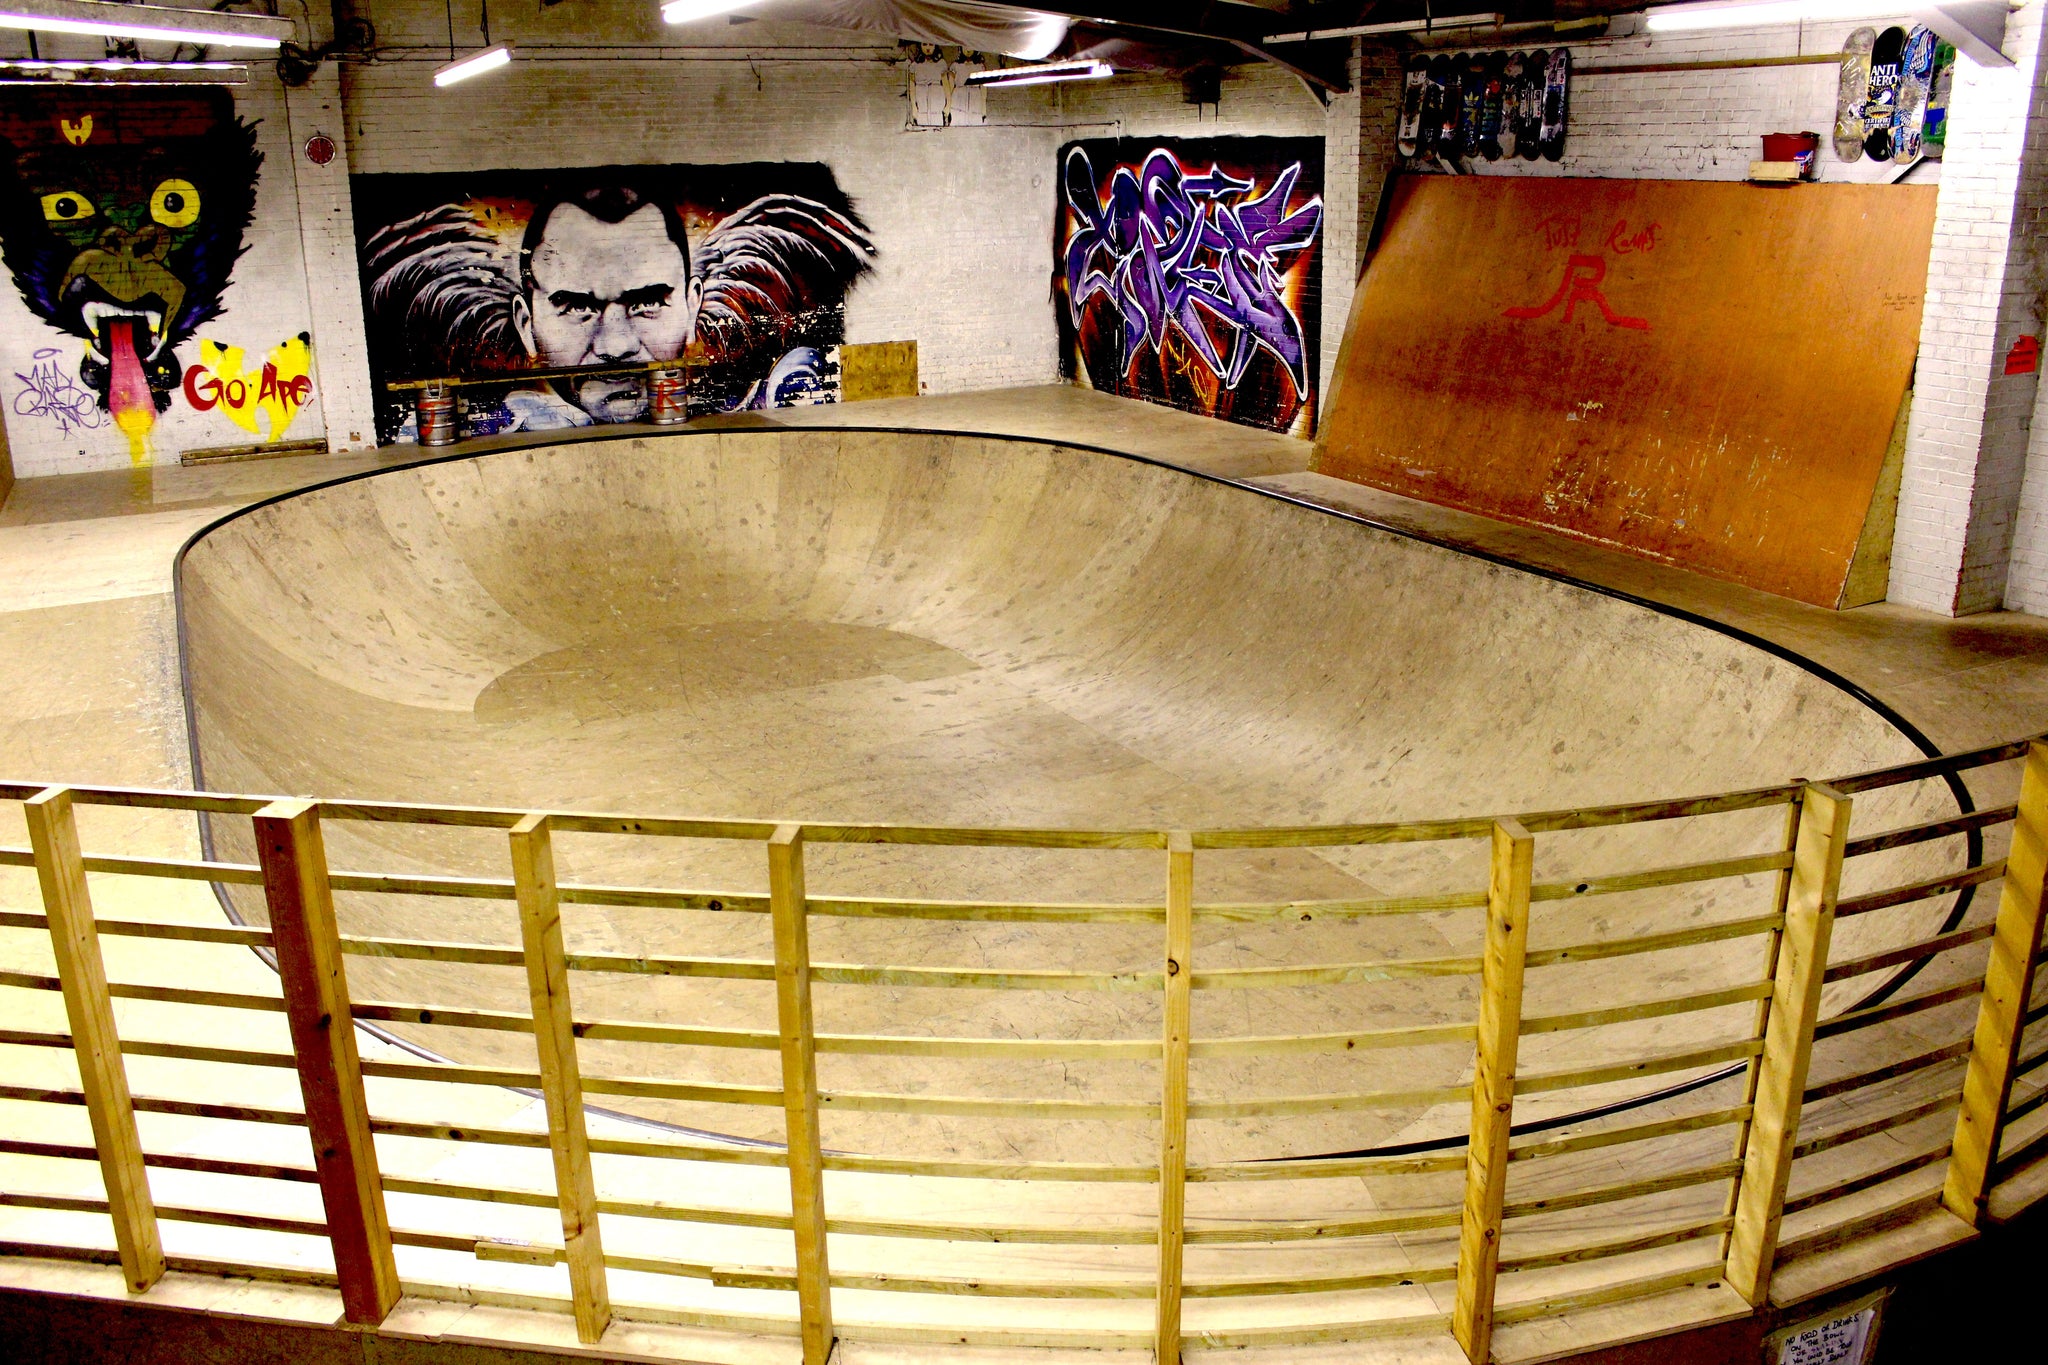 The Nike Quaker Street Bowl Was Installed Into Just Ramps Indoor Skatepark In 2014.